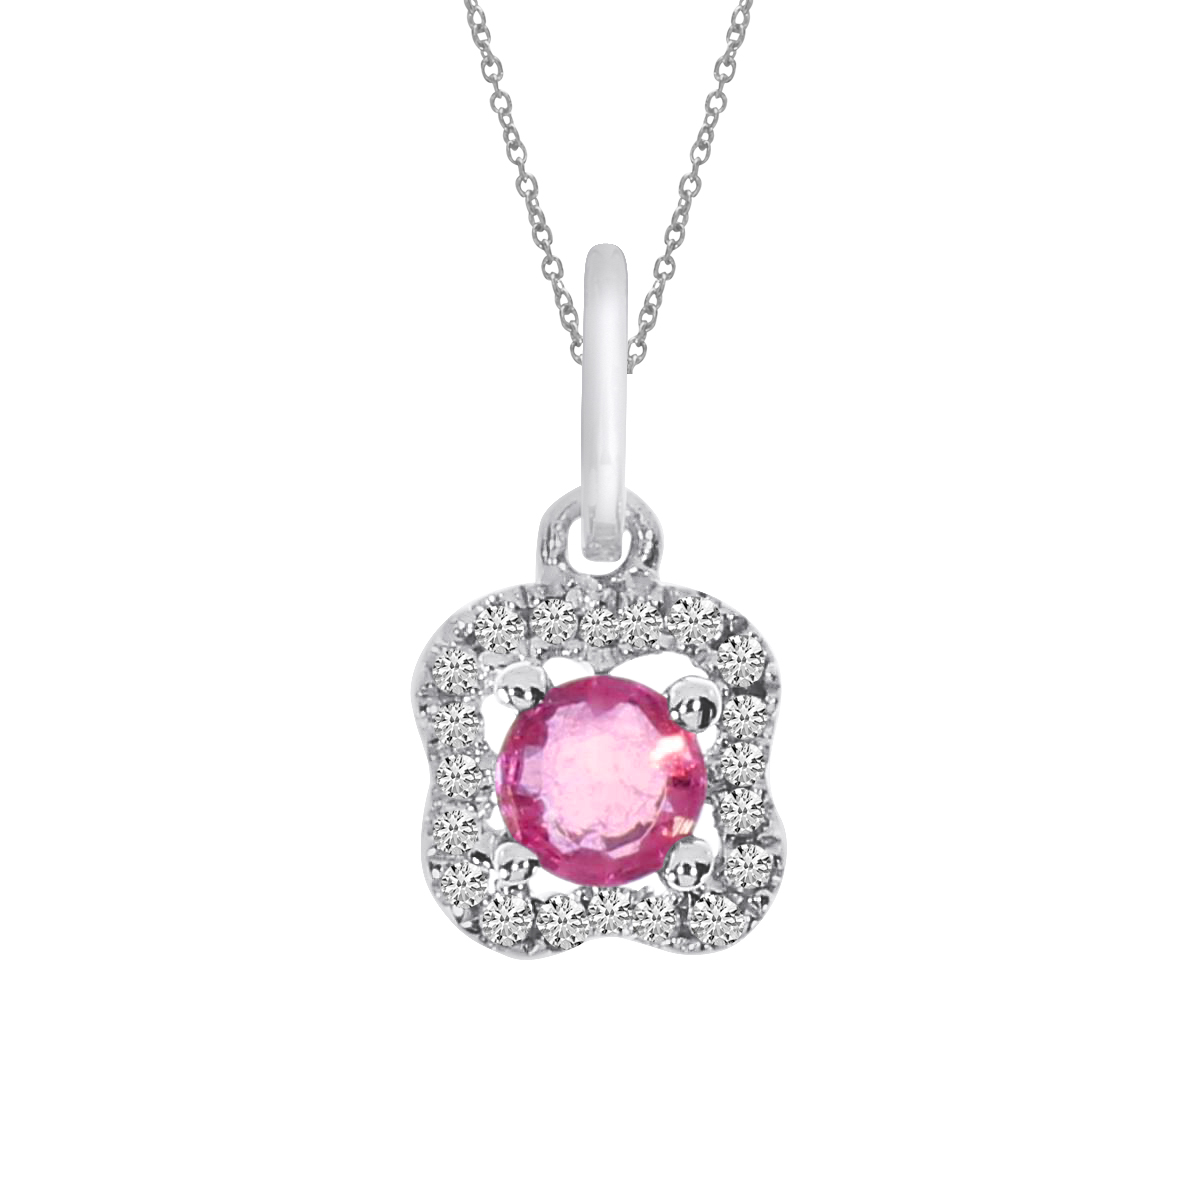 A charming pendant in 14k white gold with a beautiful 3.5 mm round ruby and .05 ct diamonds.